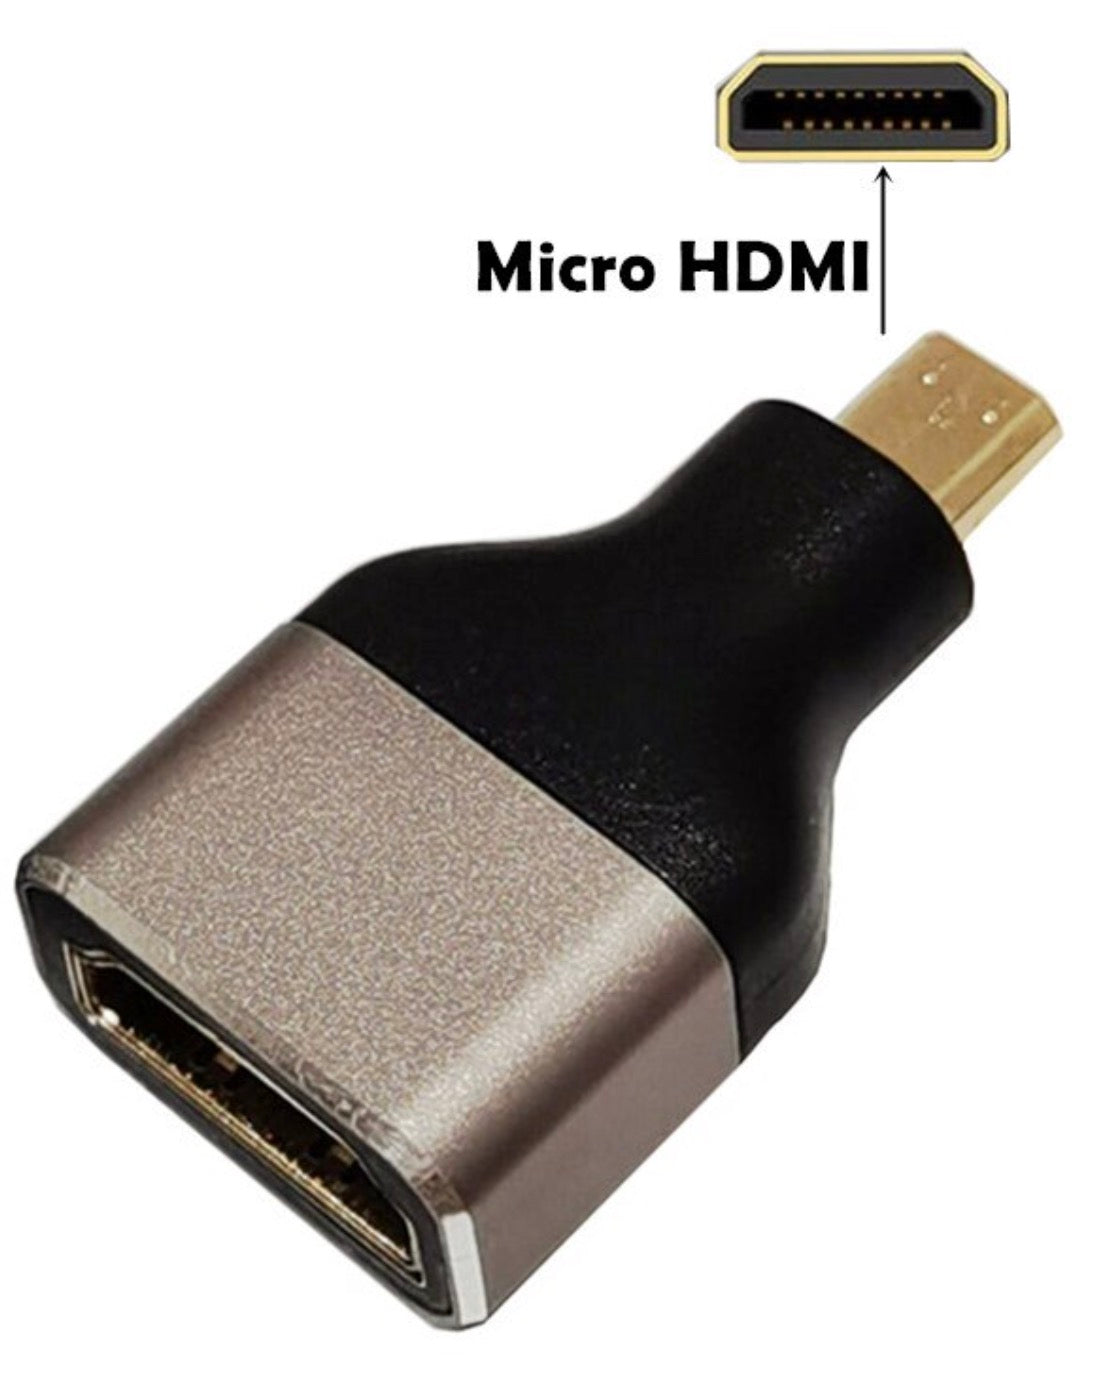 Micro HDMI 2.1 Male to HDMI Female Adapter (Supports 8K Resolutions)